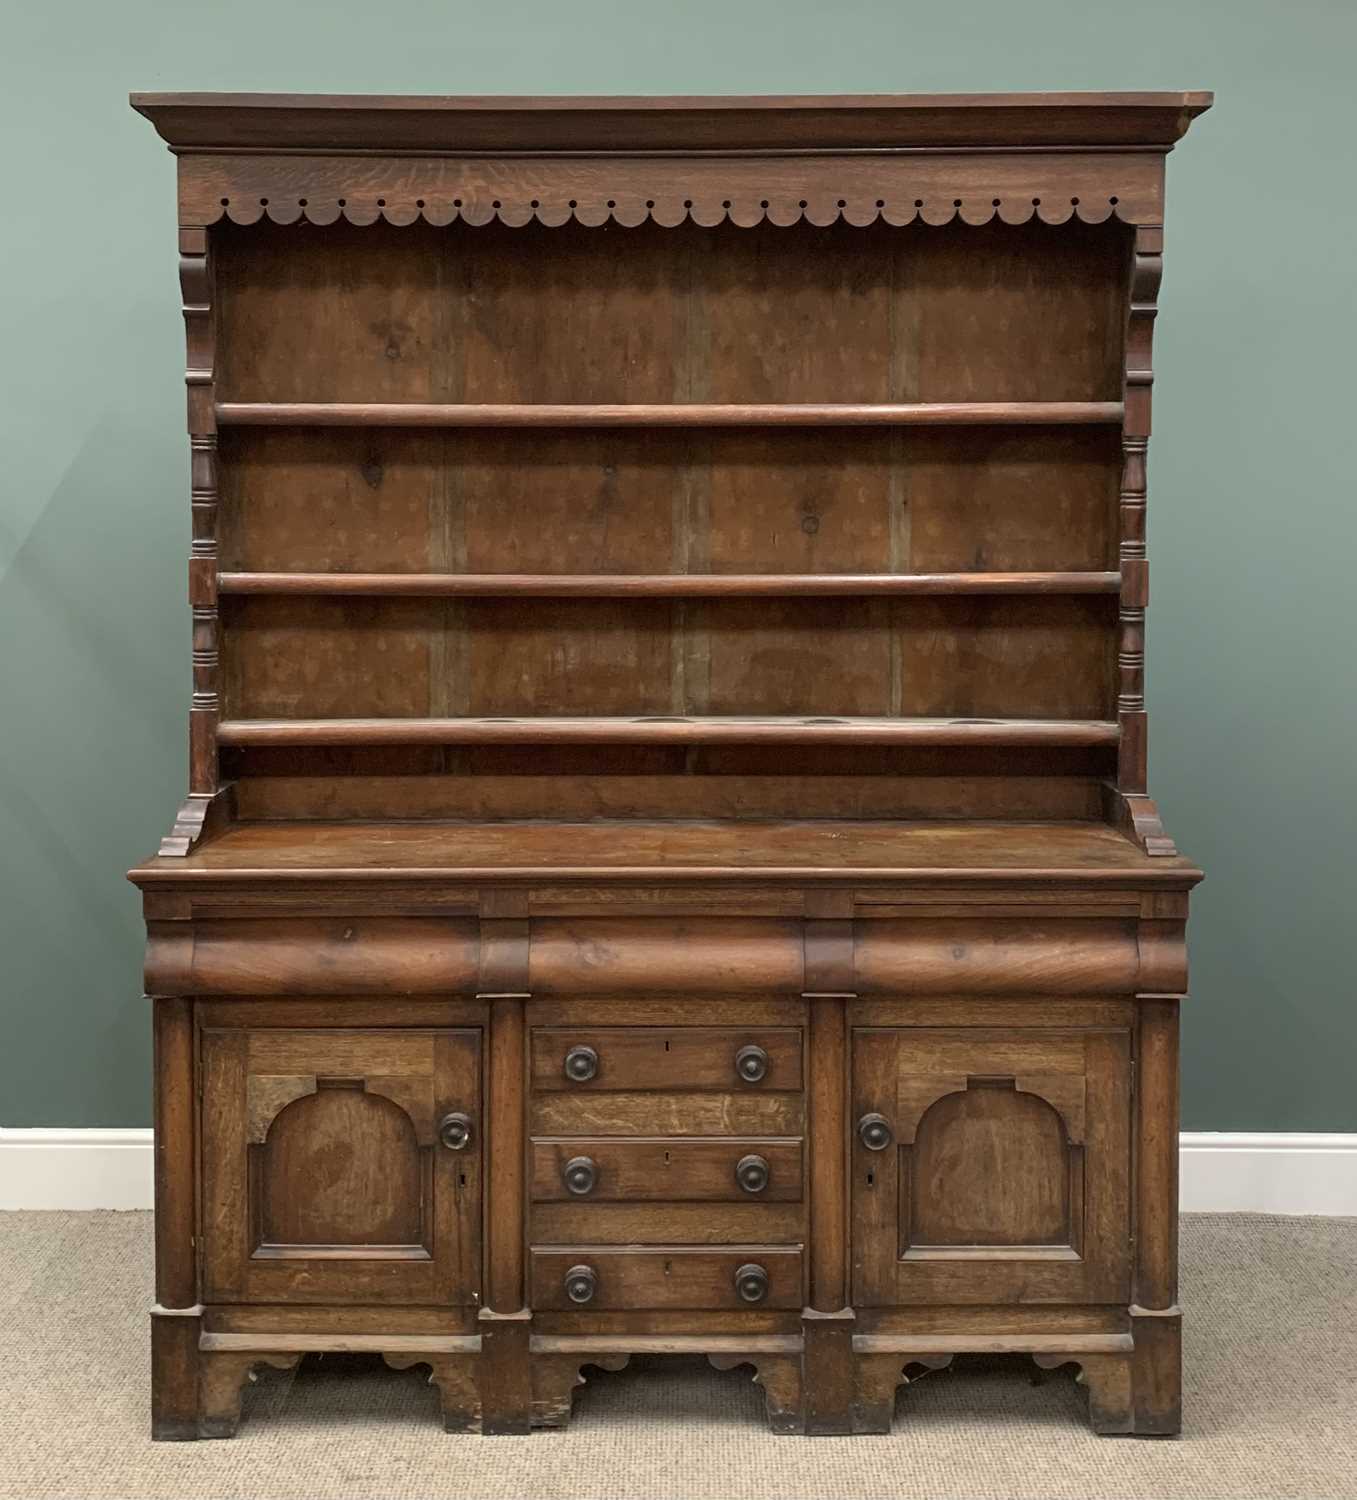 UNUSUAL NORTH WALES MAHOGANY & OAK VICTORIAN DRESSER the three shelf rack with unusual carved and